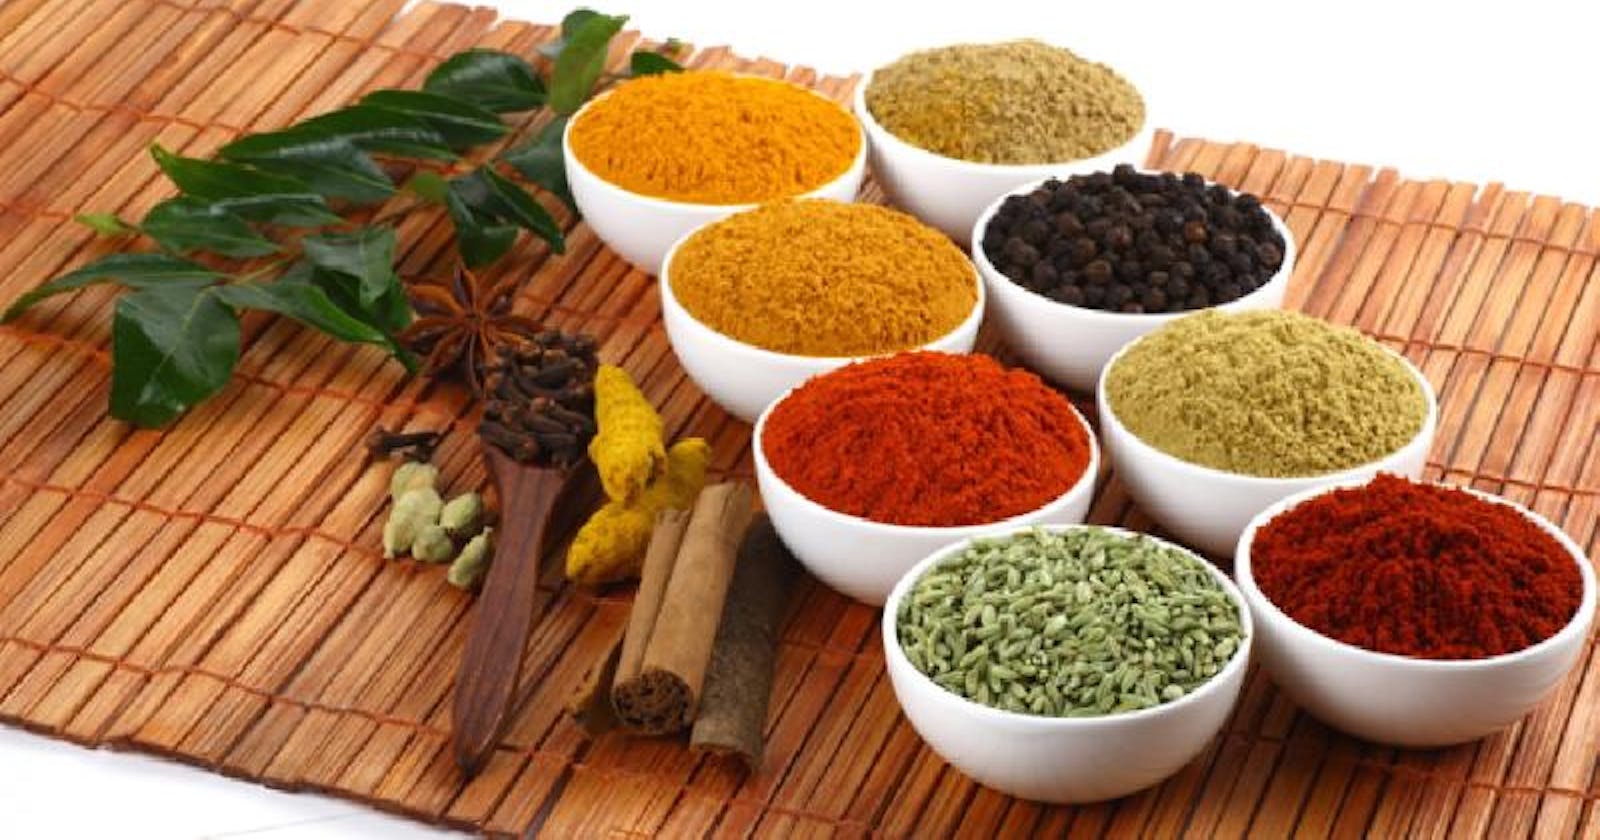 How To Deal With Bulk Spice Exporters